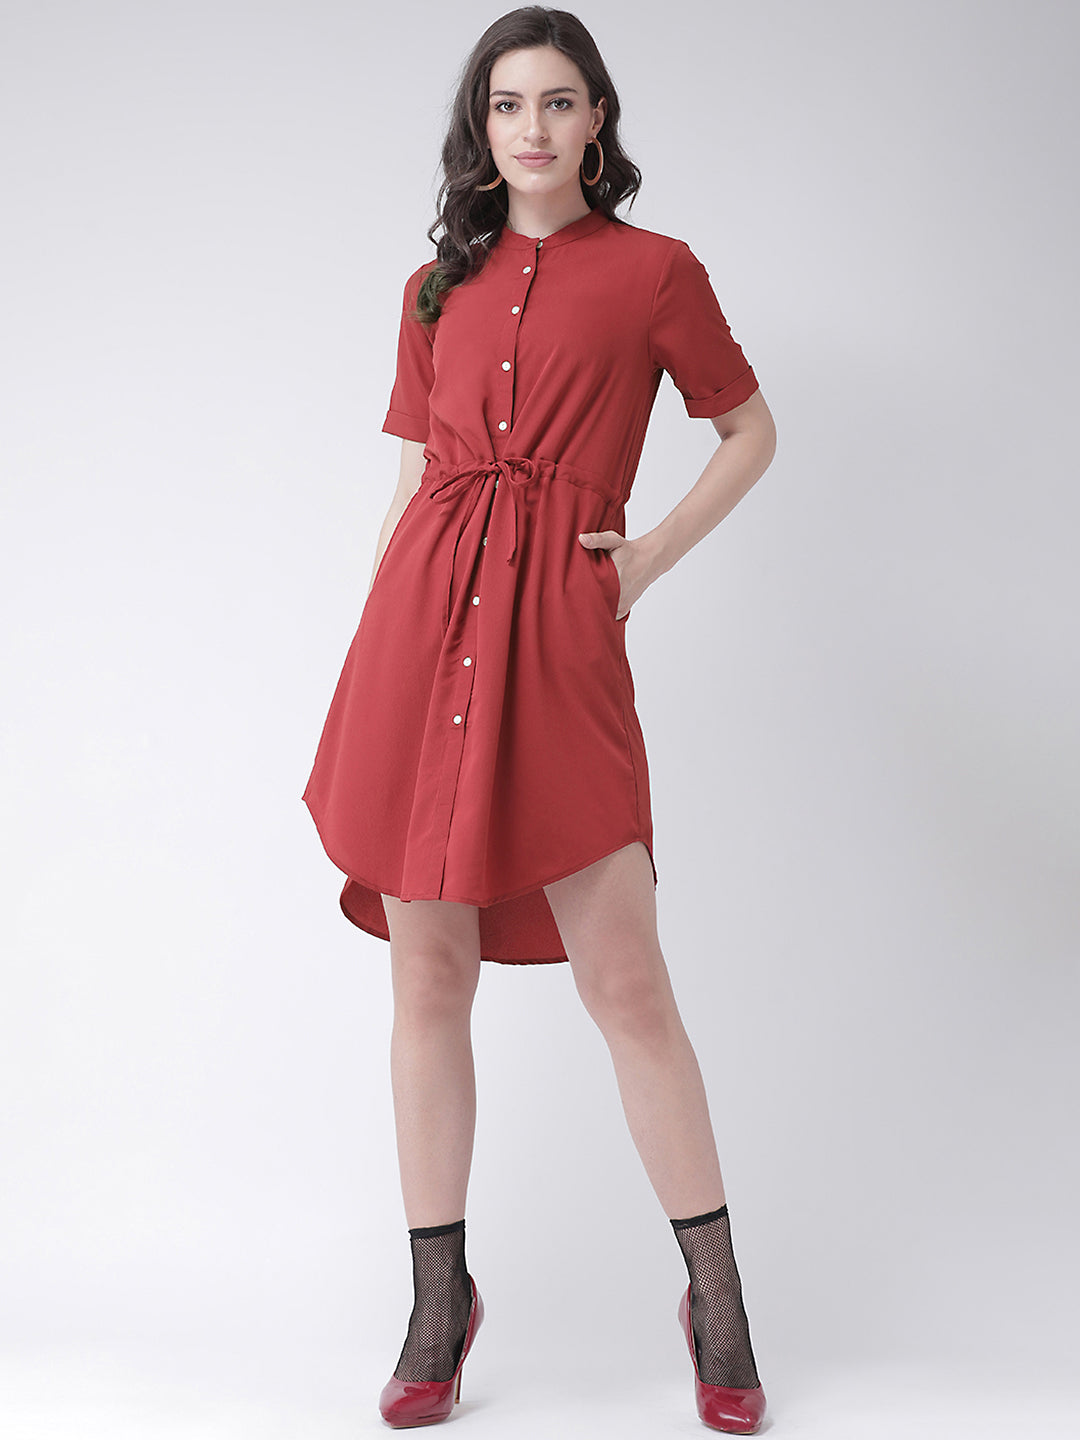 Msfq Women'S Solid Shirt Dress With Short Sleeves